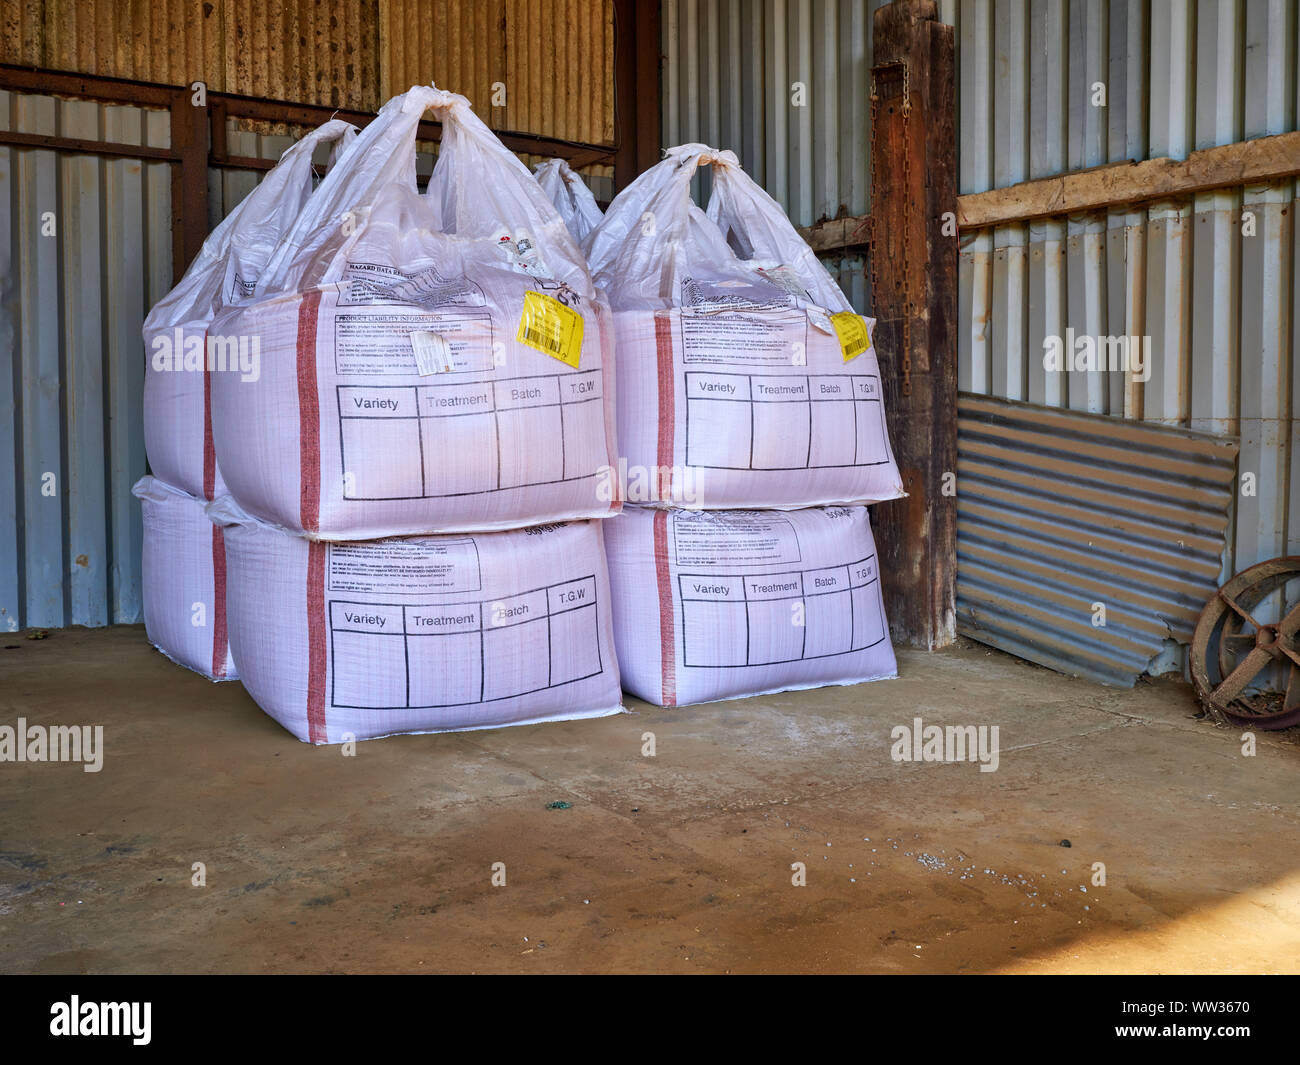 500kg half ton bags of winter wheat seed in storage in farm shed agricultural building Stock Photo